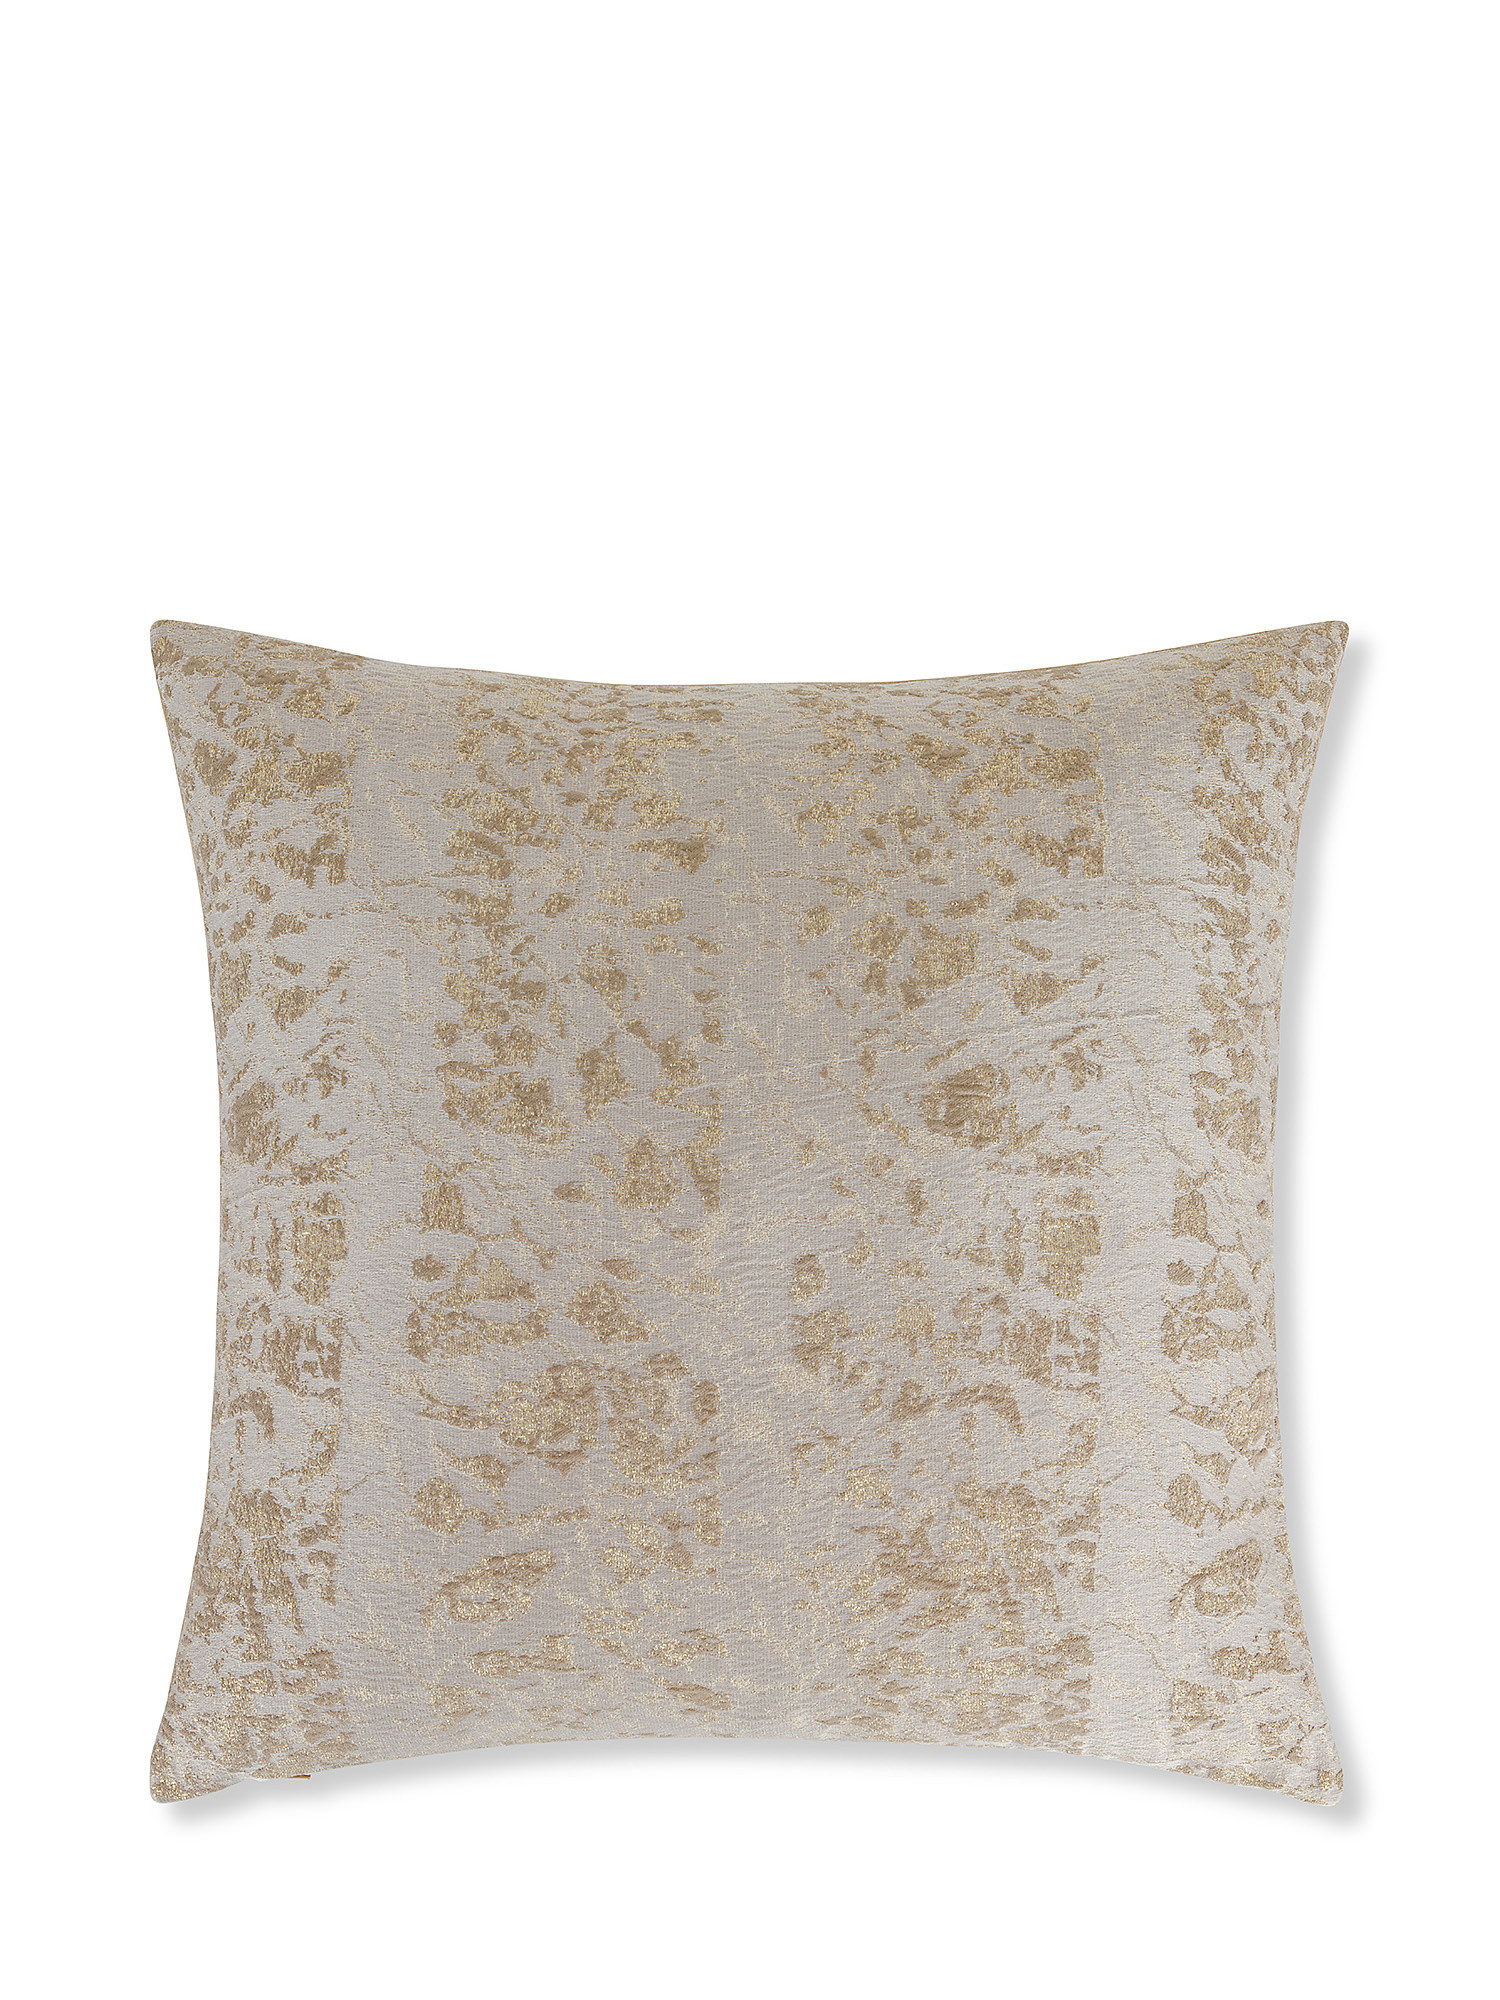 Jacquard cushion with abstract motif 50x50cm, Beige, large image number 0